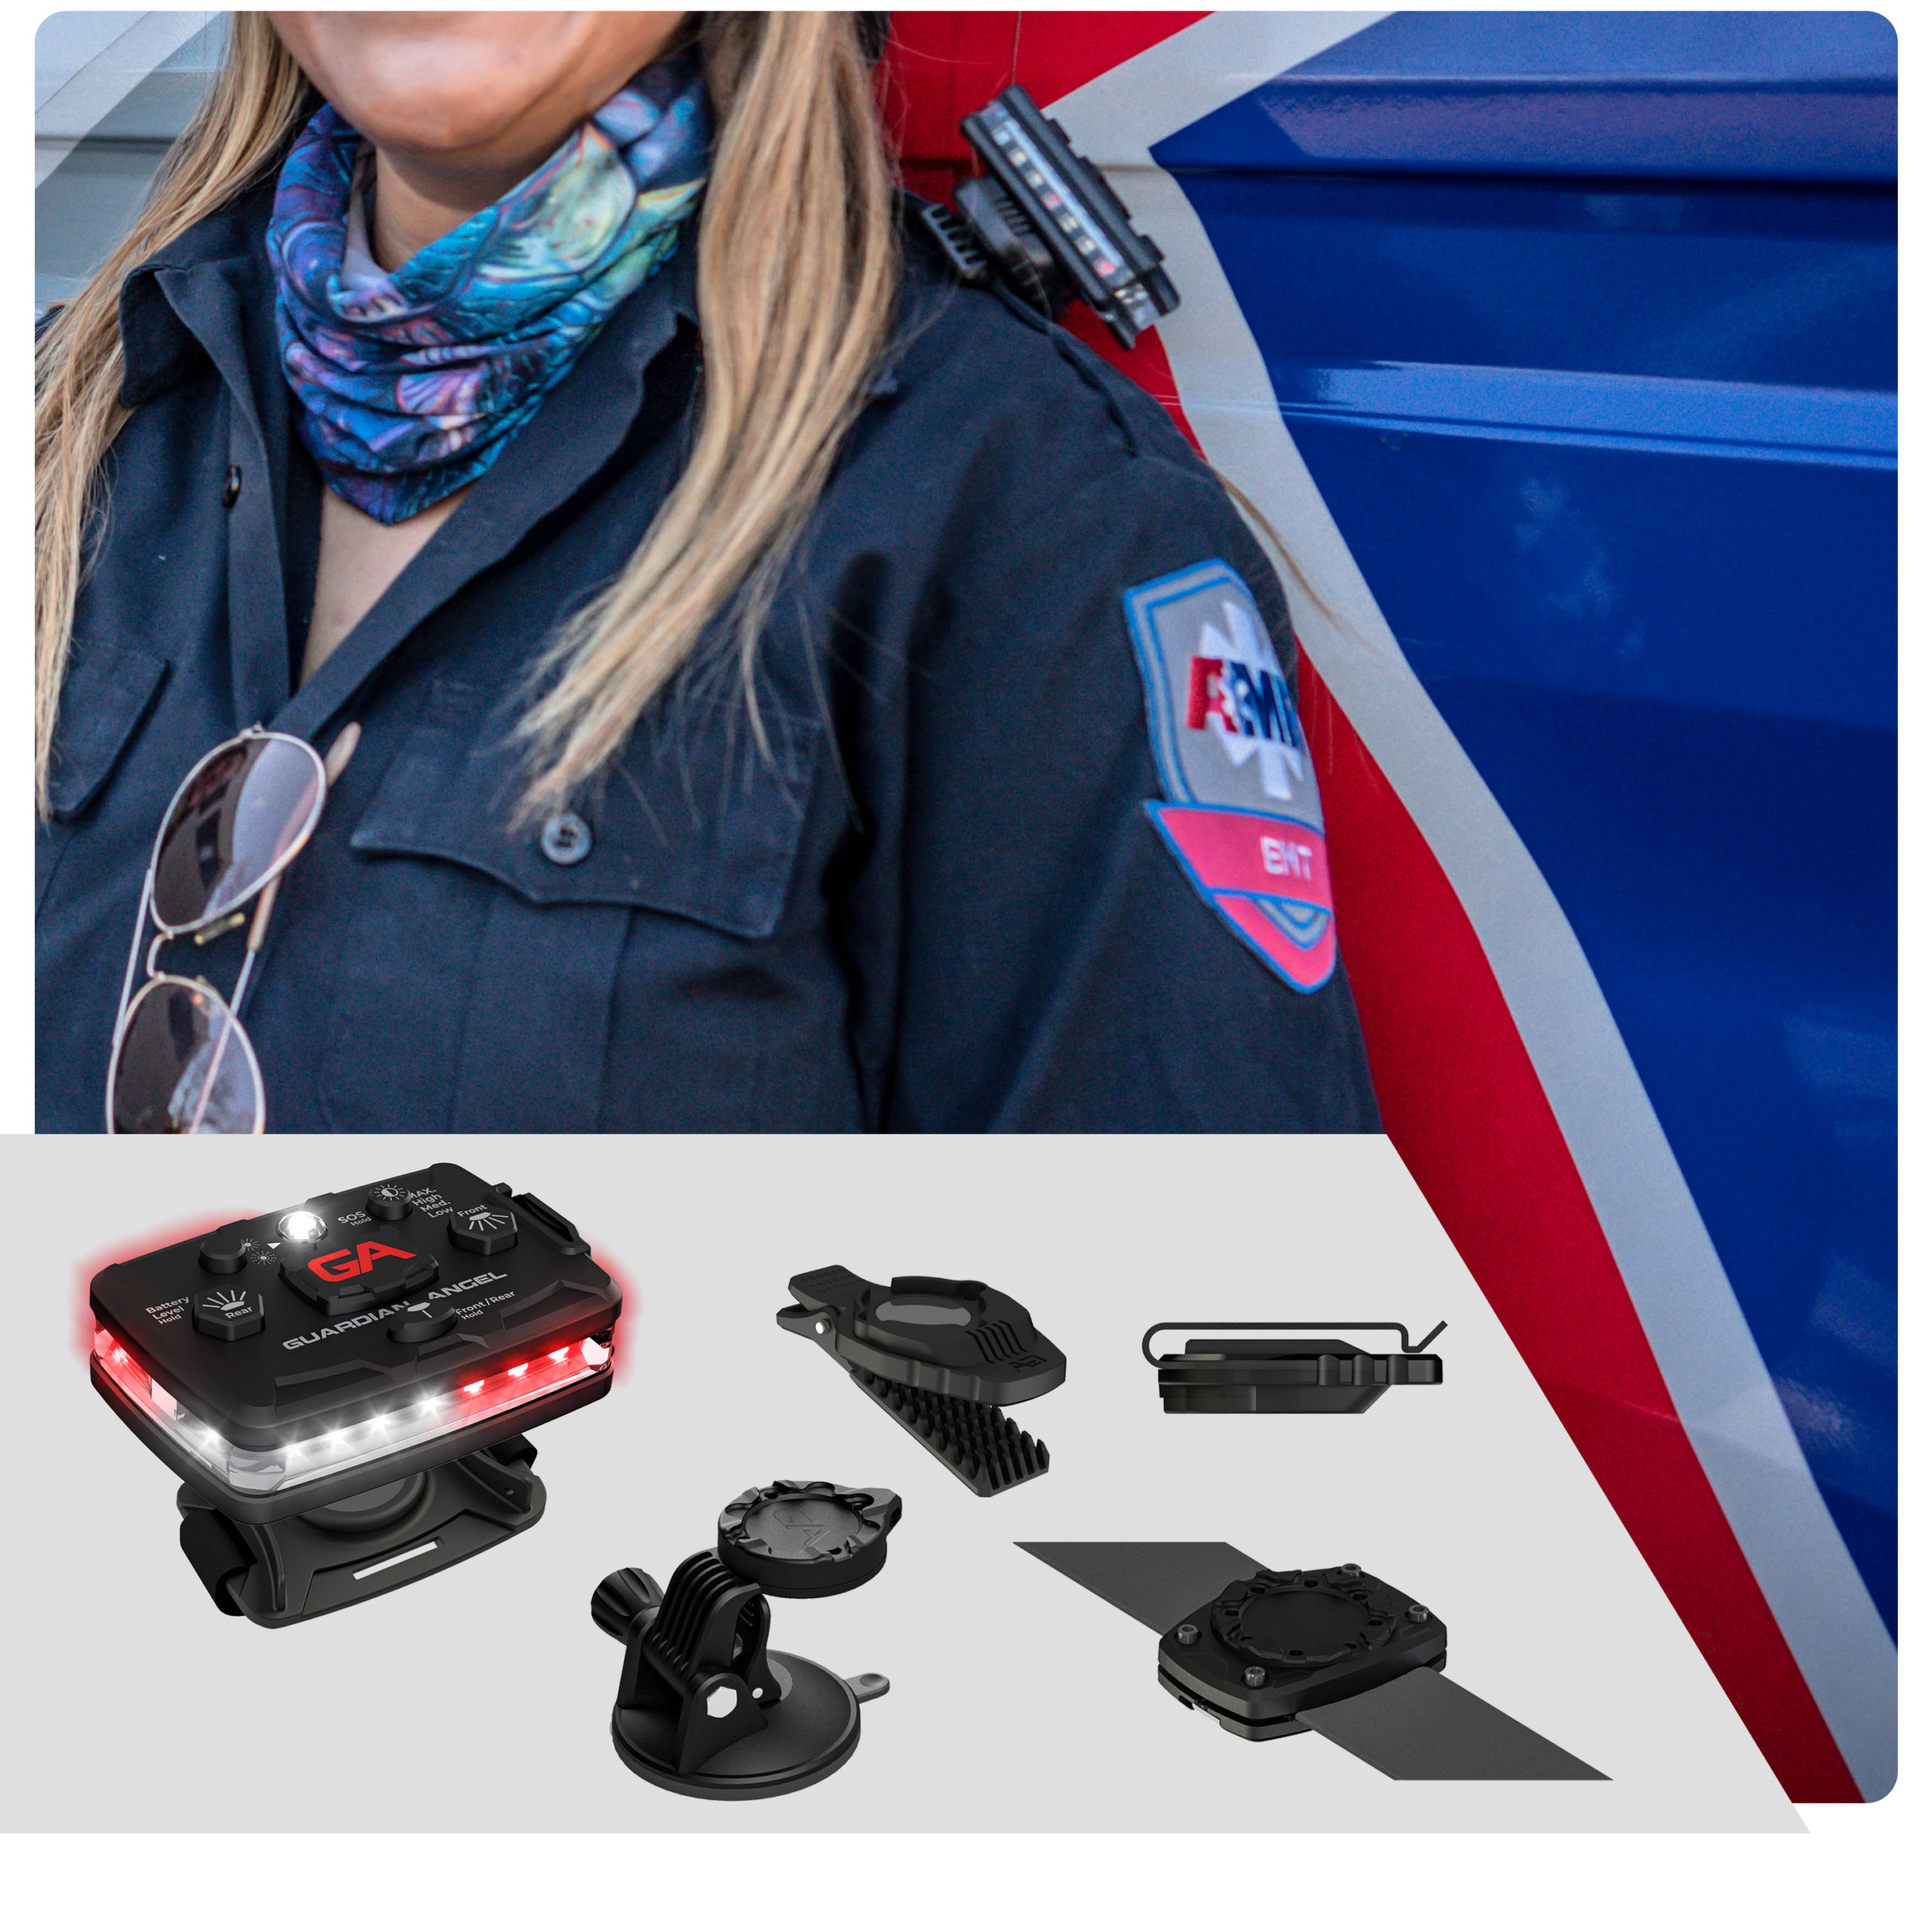 First Responder Wearable Safety Light